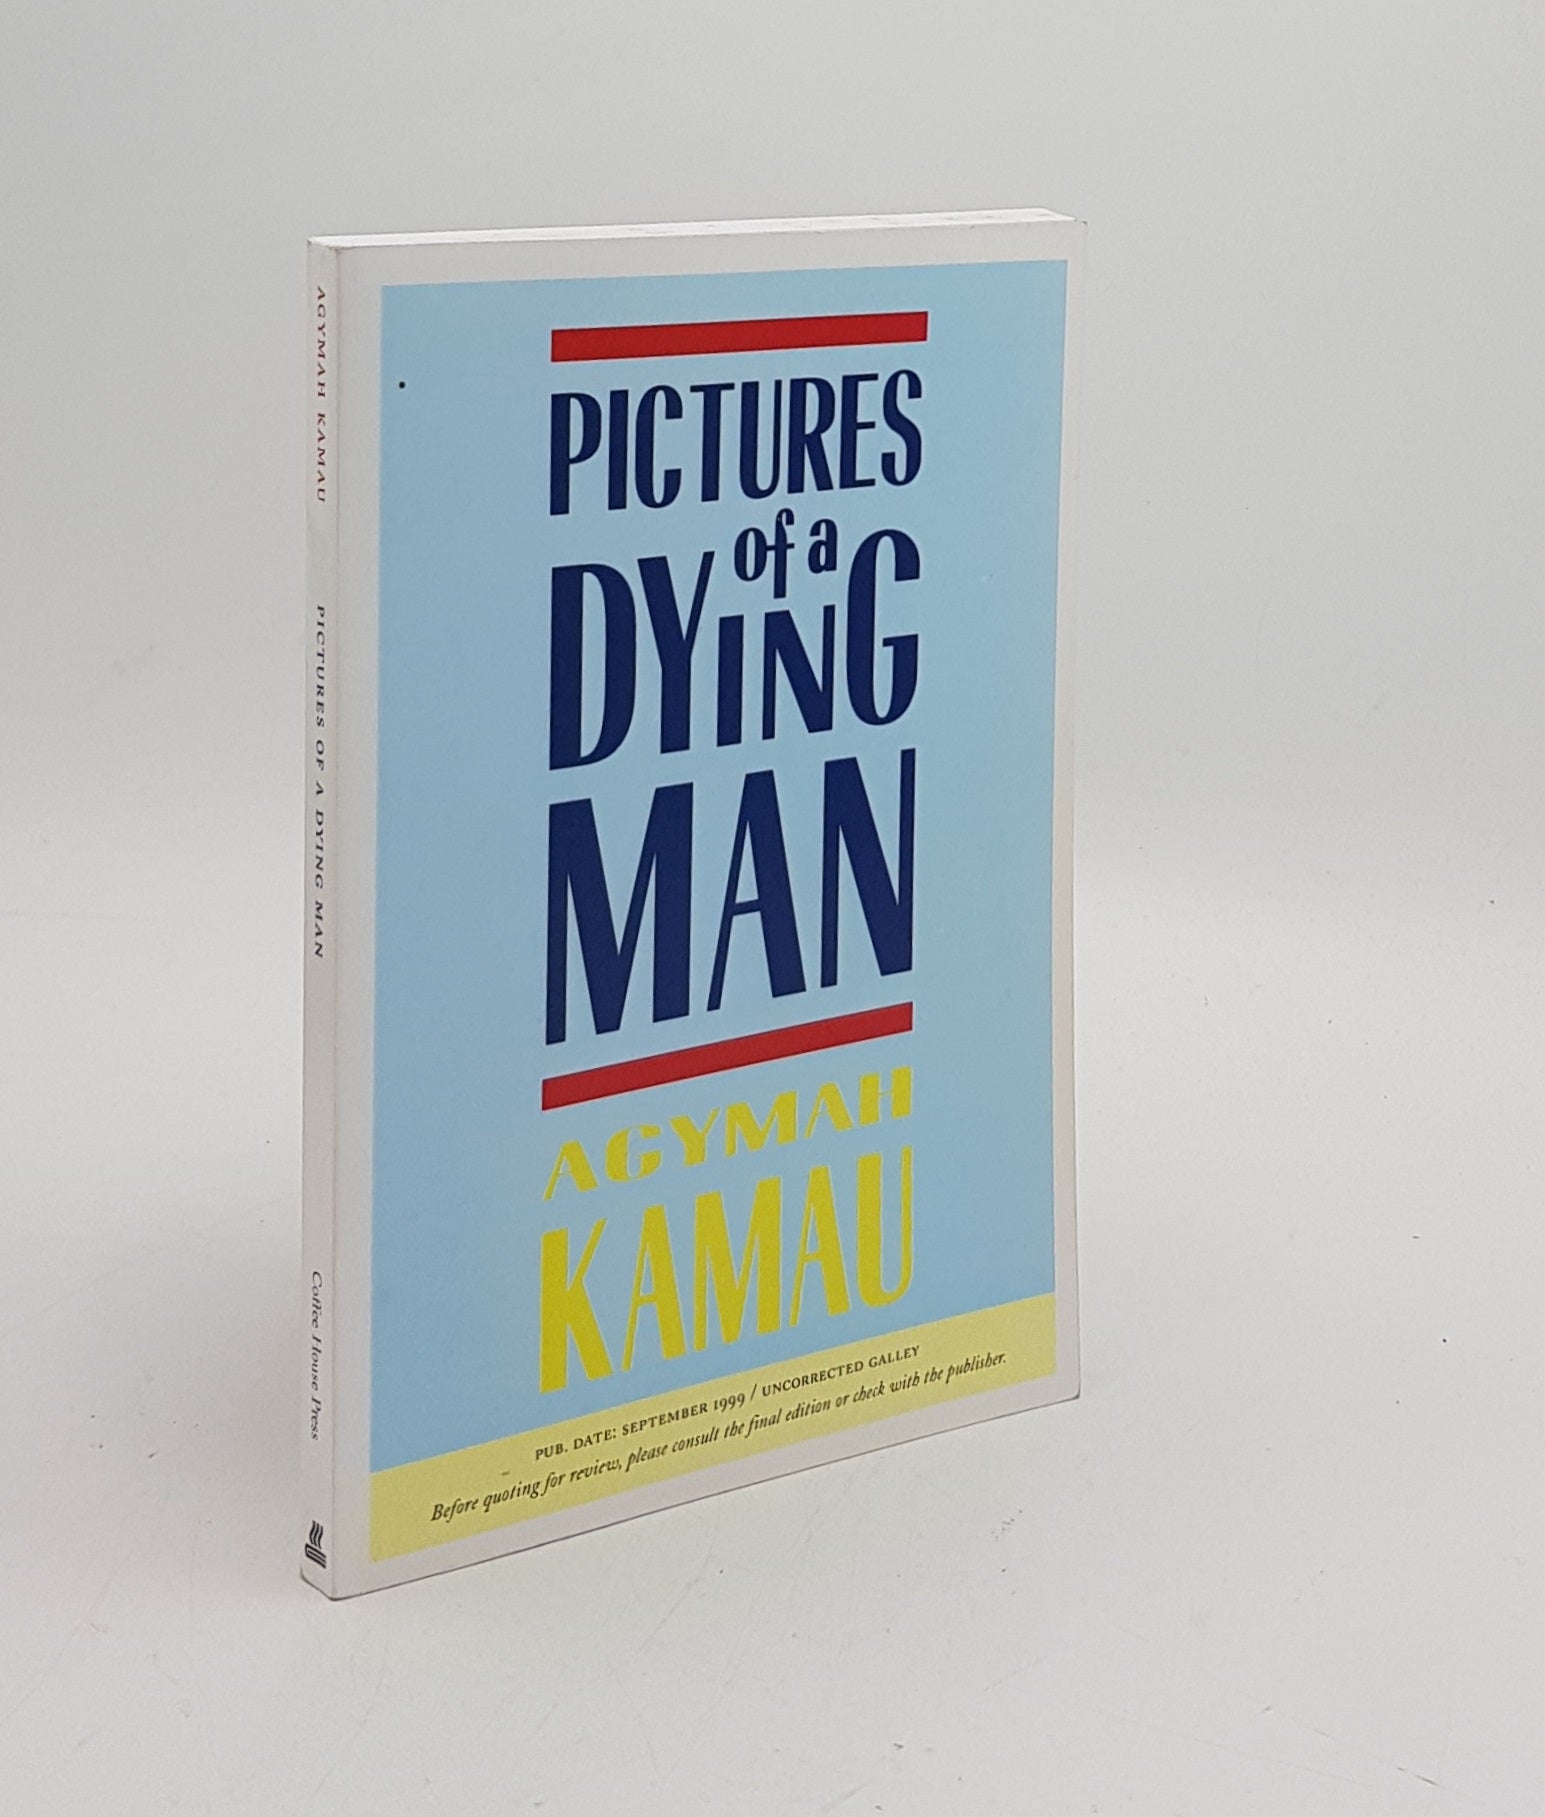 KAMAU Agymah - Pictures of a Dying Man